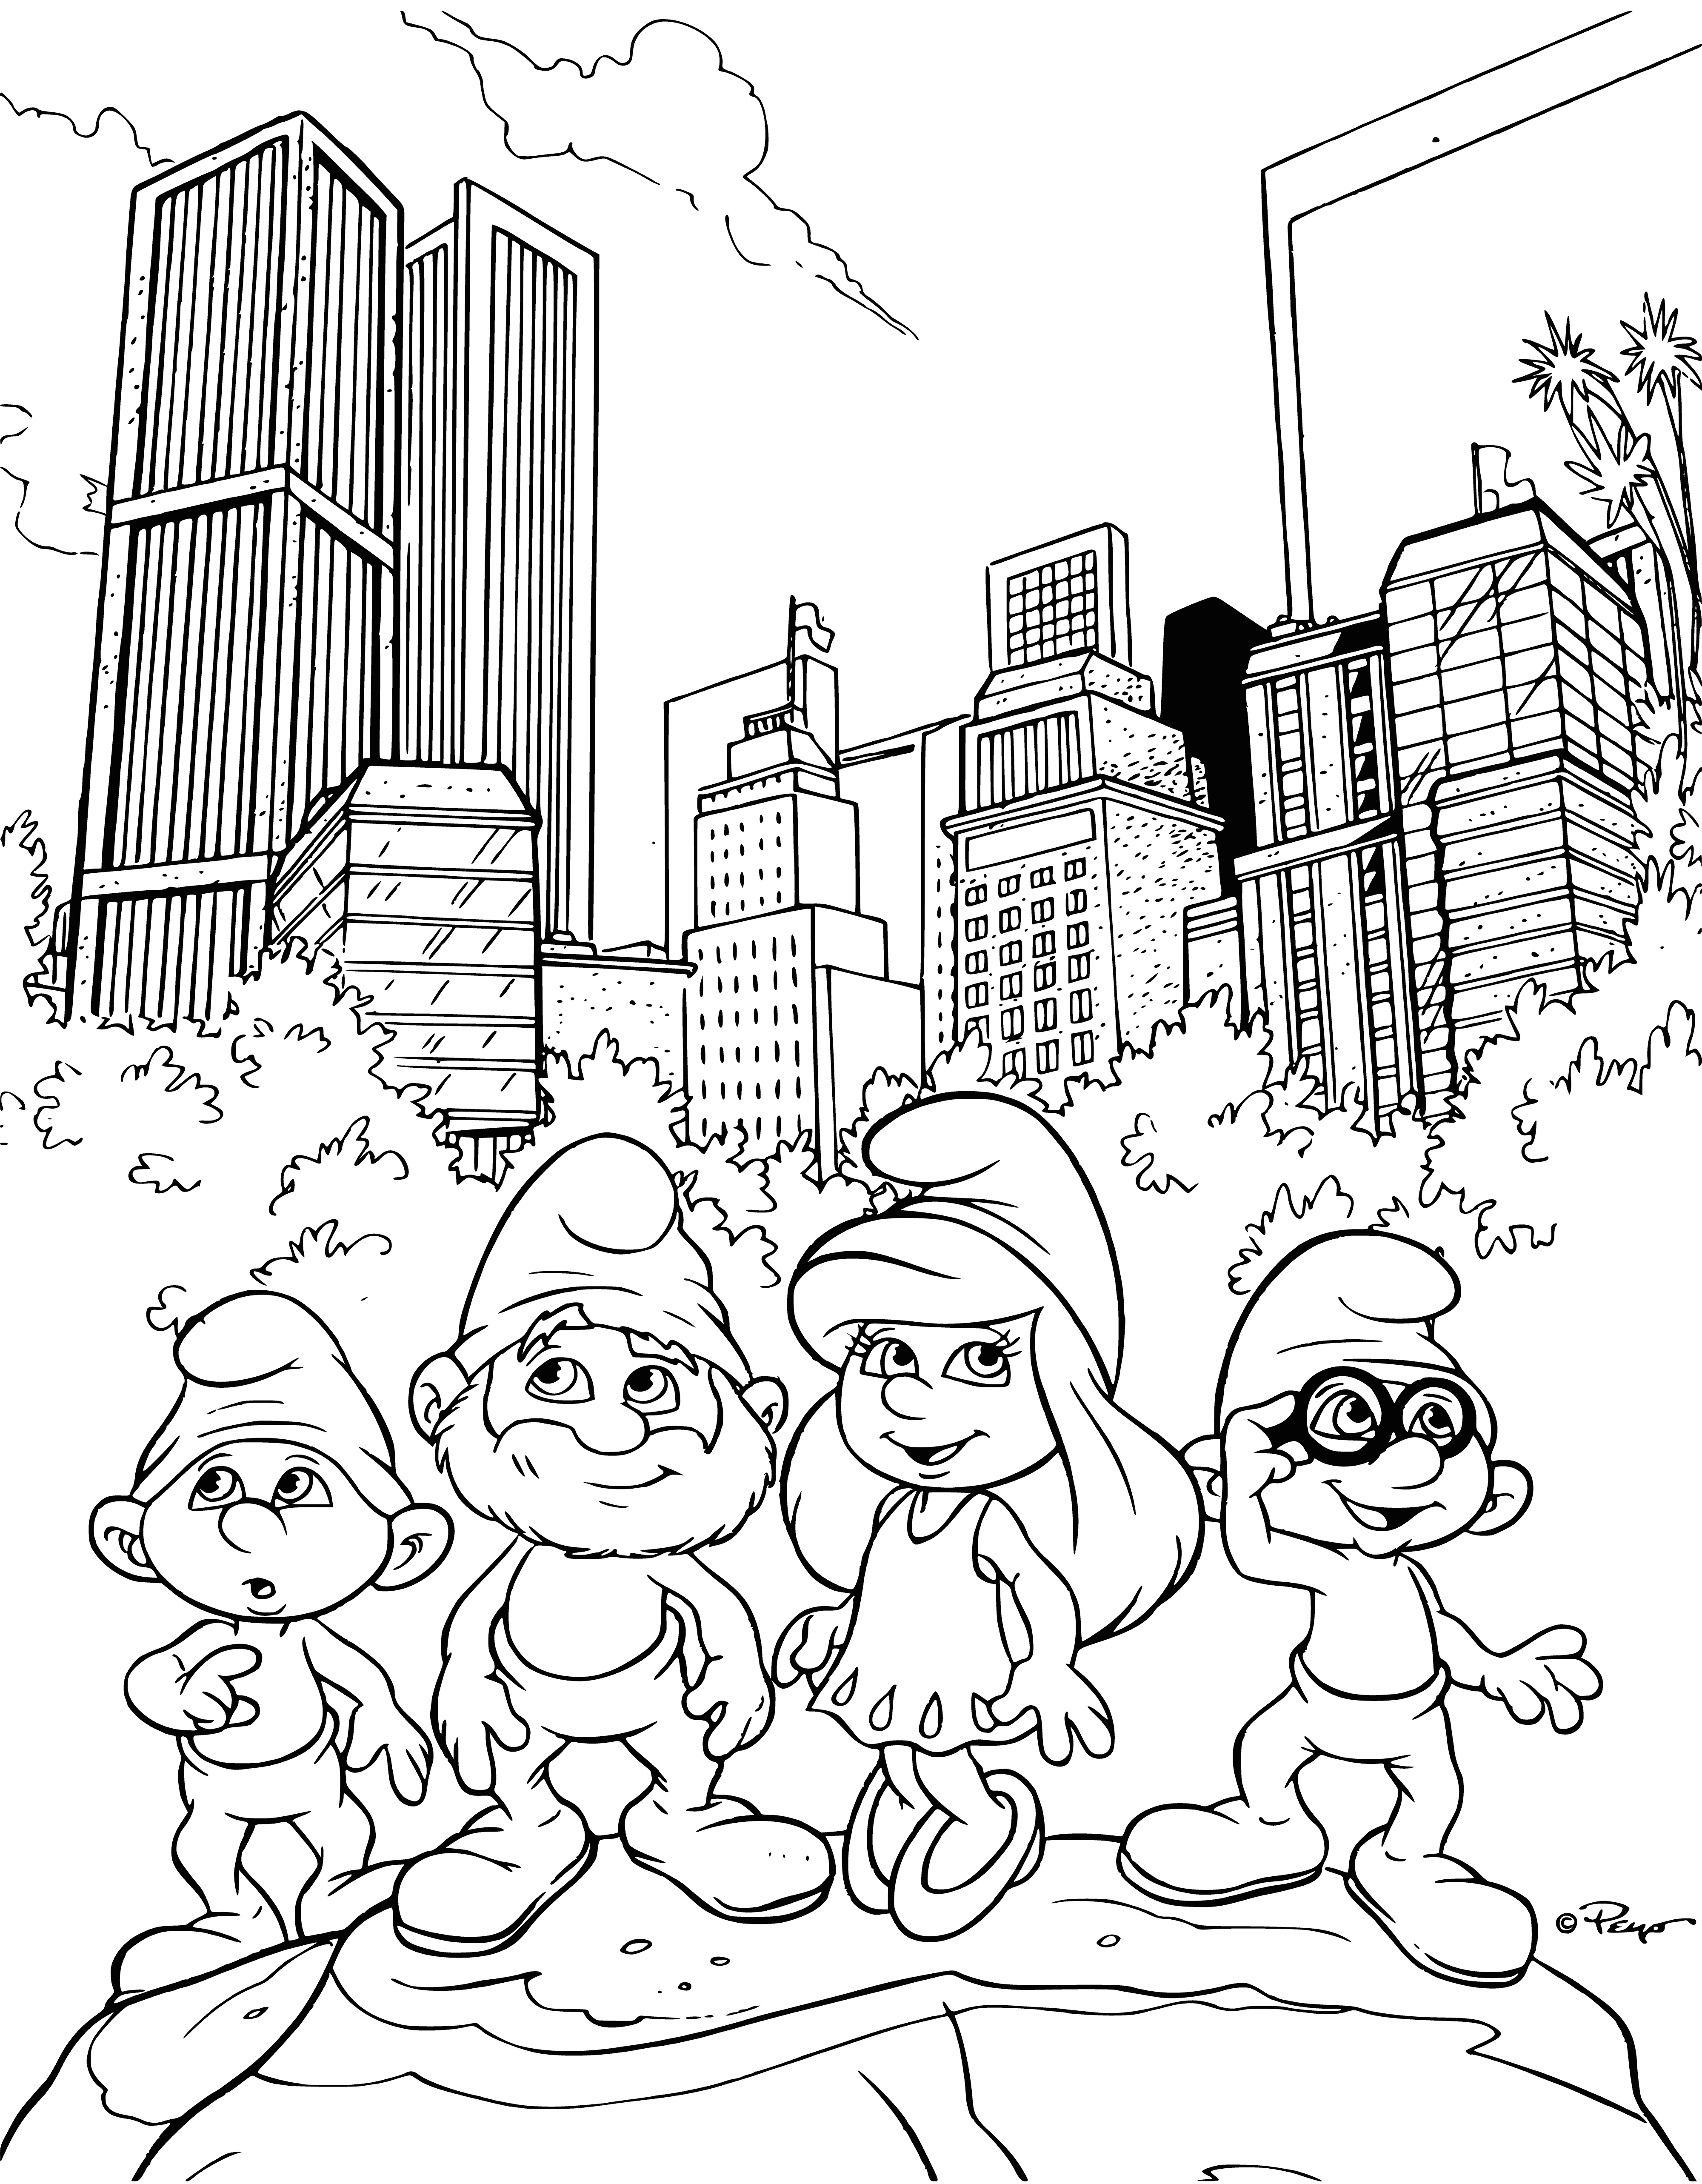 The Smurfs in the City coloring page